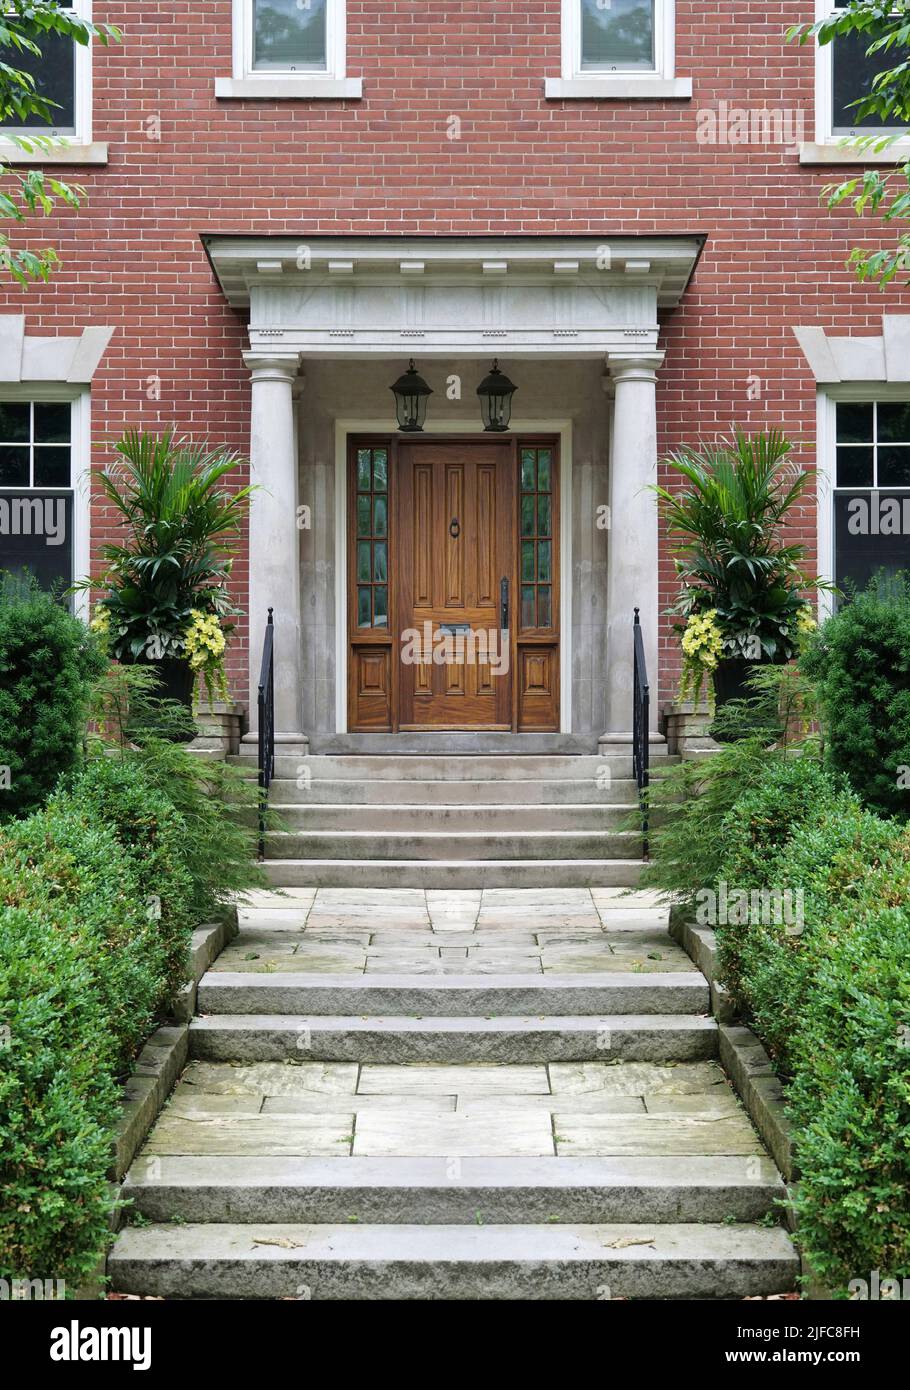 Long flagstone path leading to portico entrance of traditional brick house, with elegant wood grain front door with sidelights Stock Photo